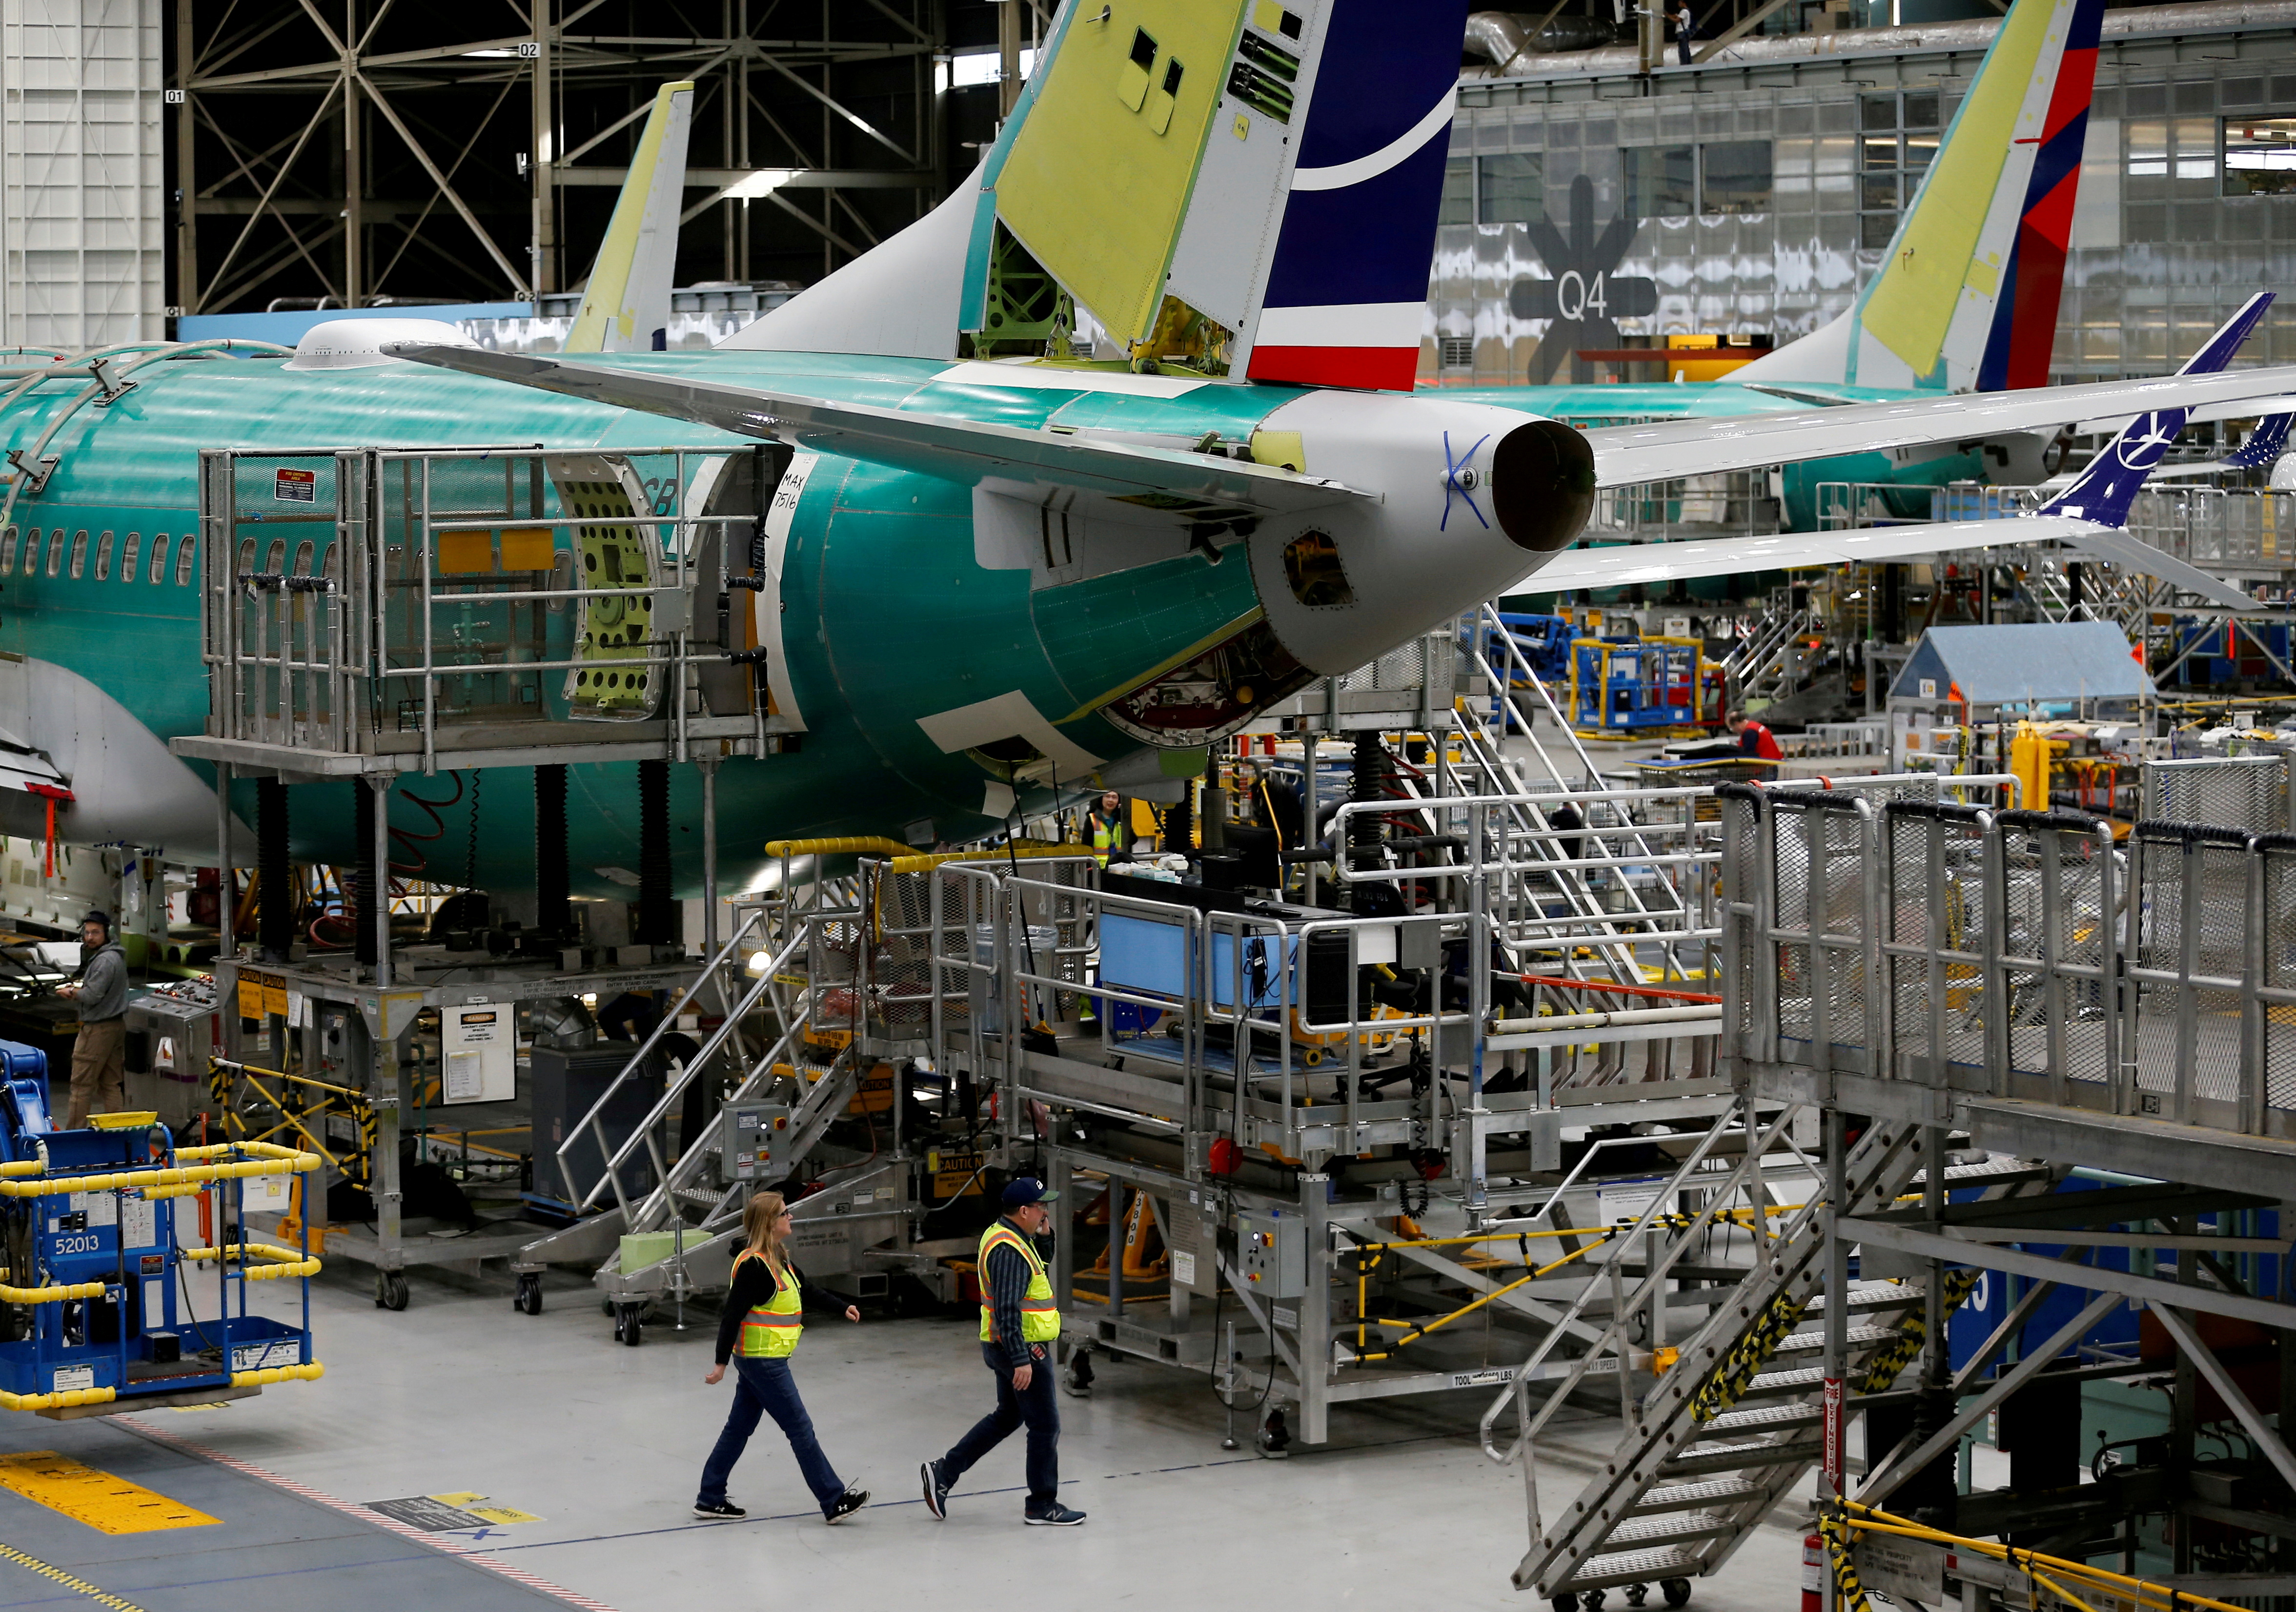 Employees walk by the end of a 737 Max aircraft at the Boeing factory in Renton, Washington, U.S., March 27, 2019.  REUTERS/Lindsey Wasson/File Photo